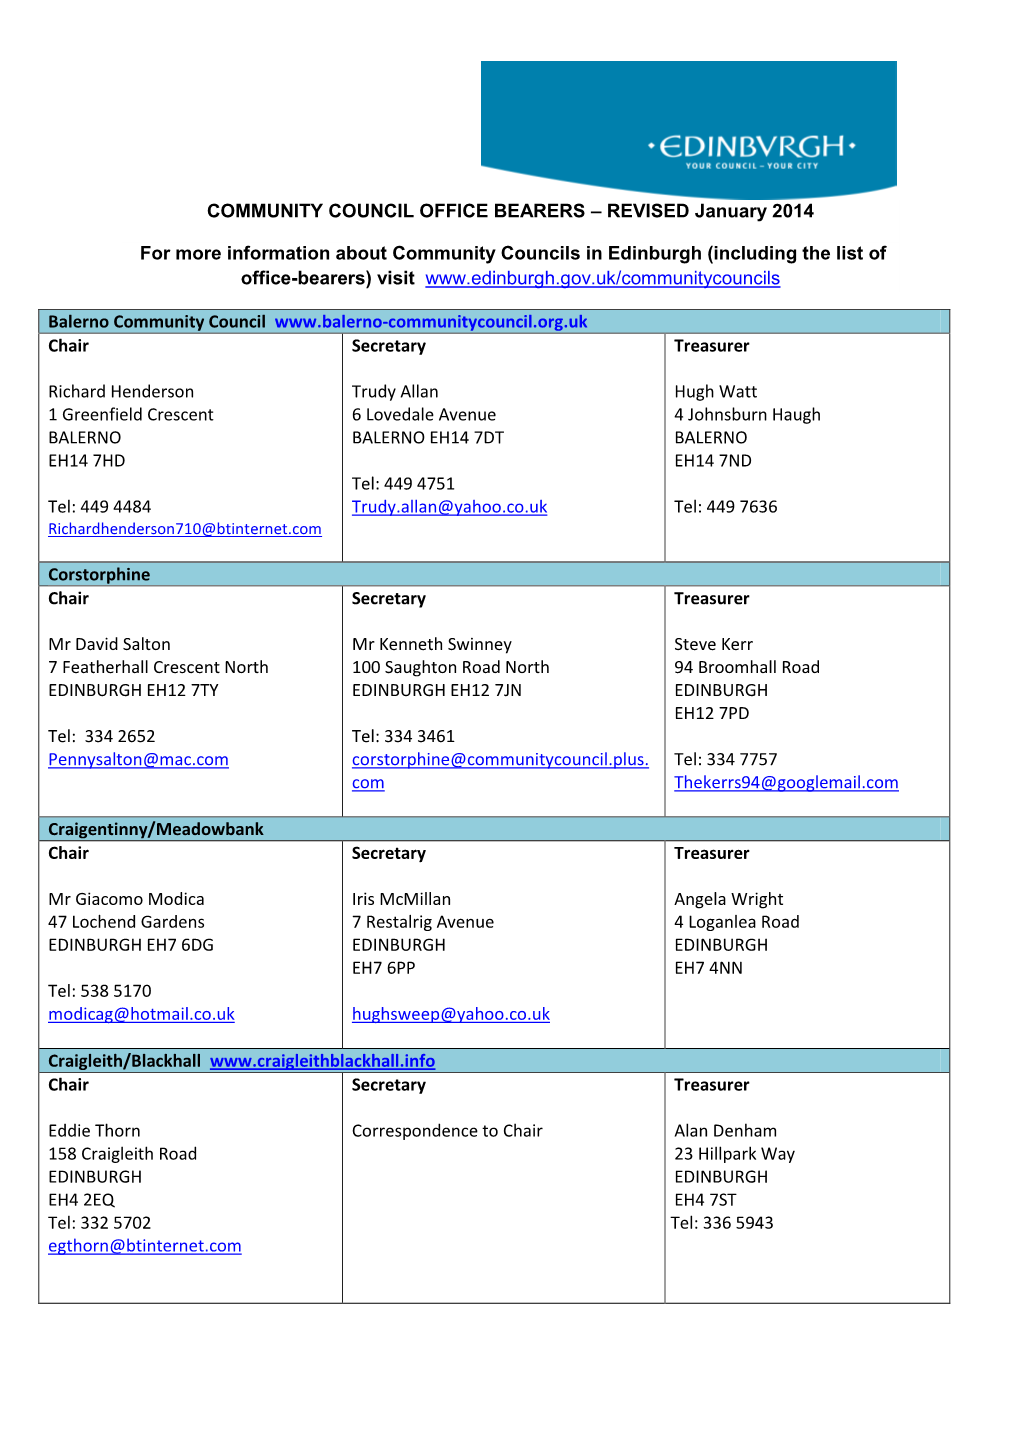 COMMUNITY COUNCIL OFFICE BEARERS – REVISED January 2014